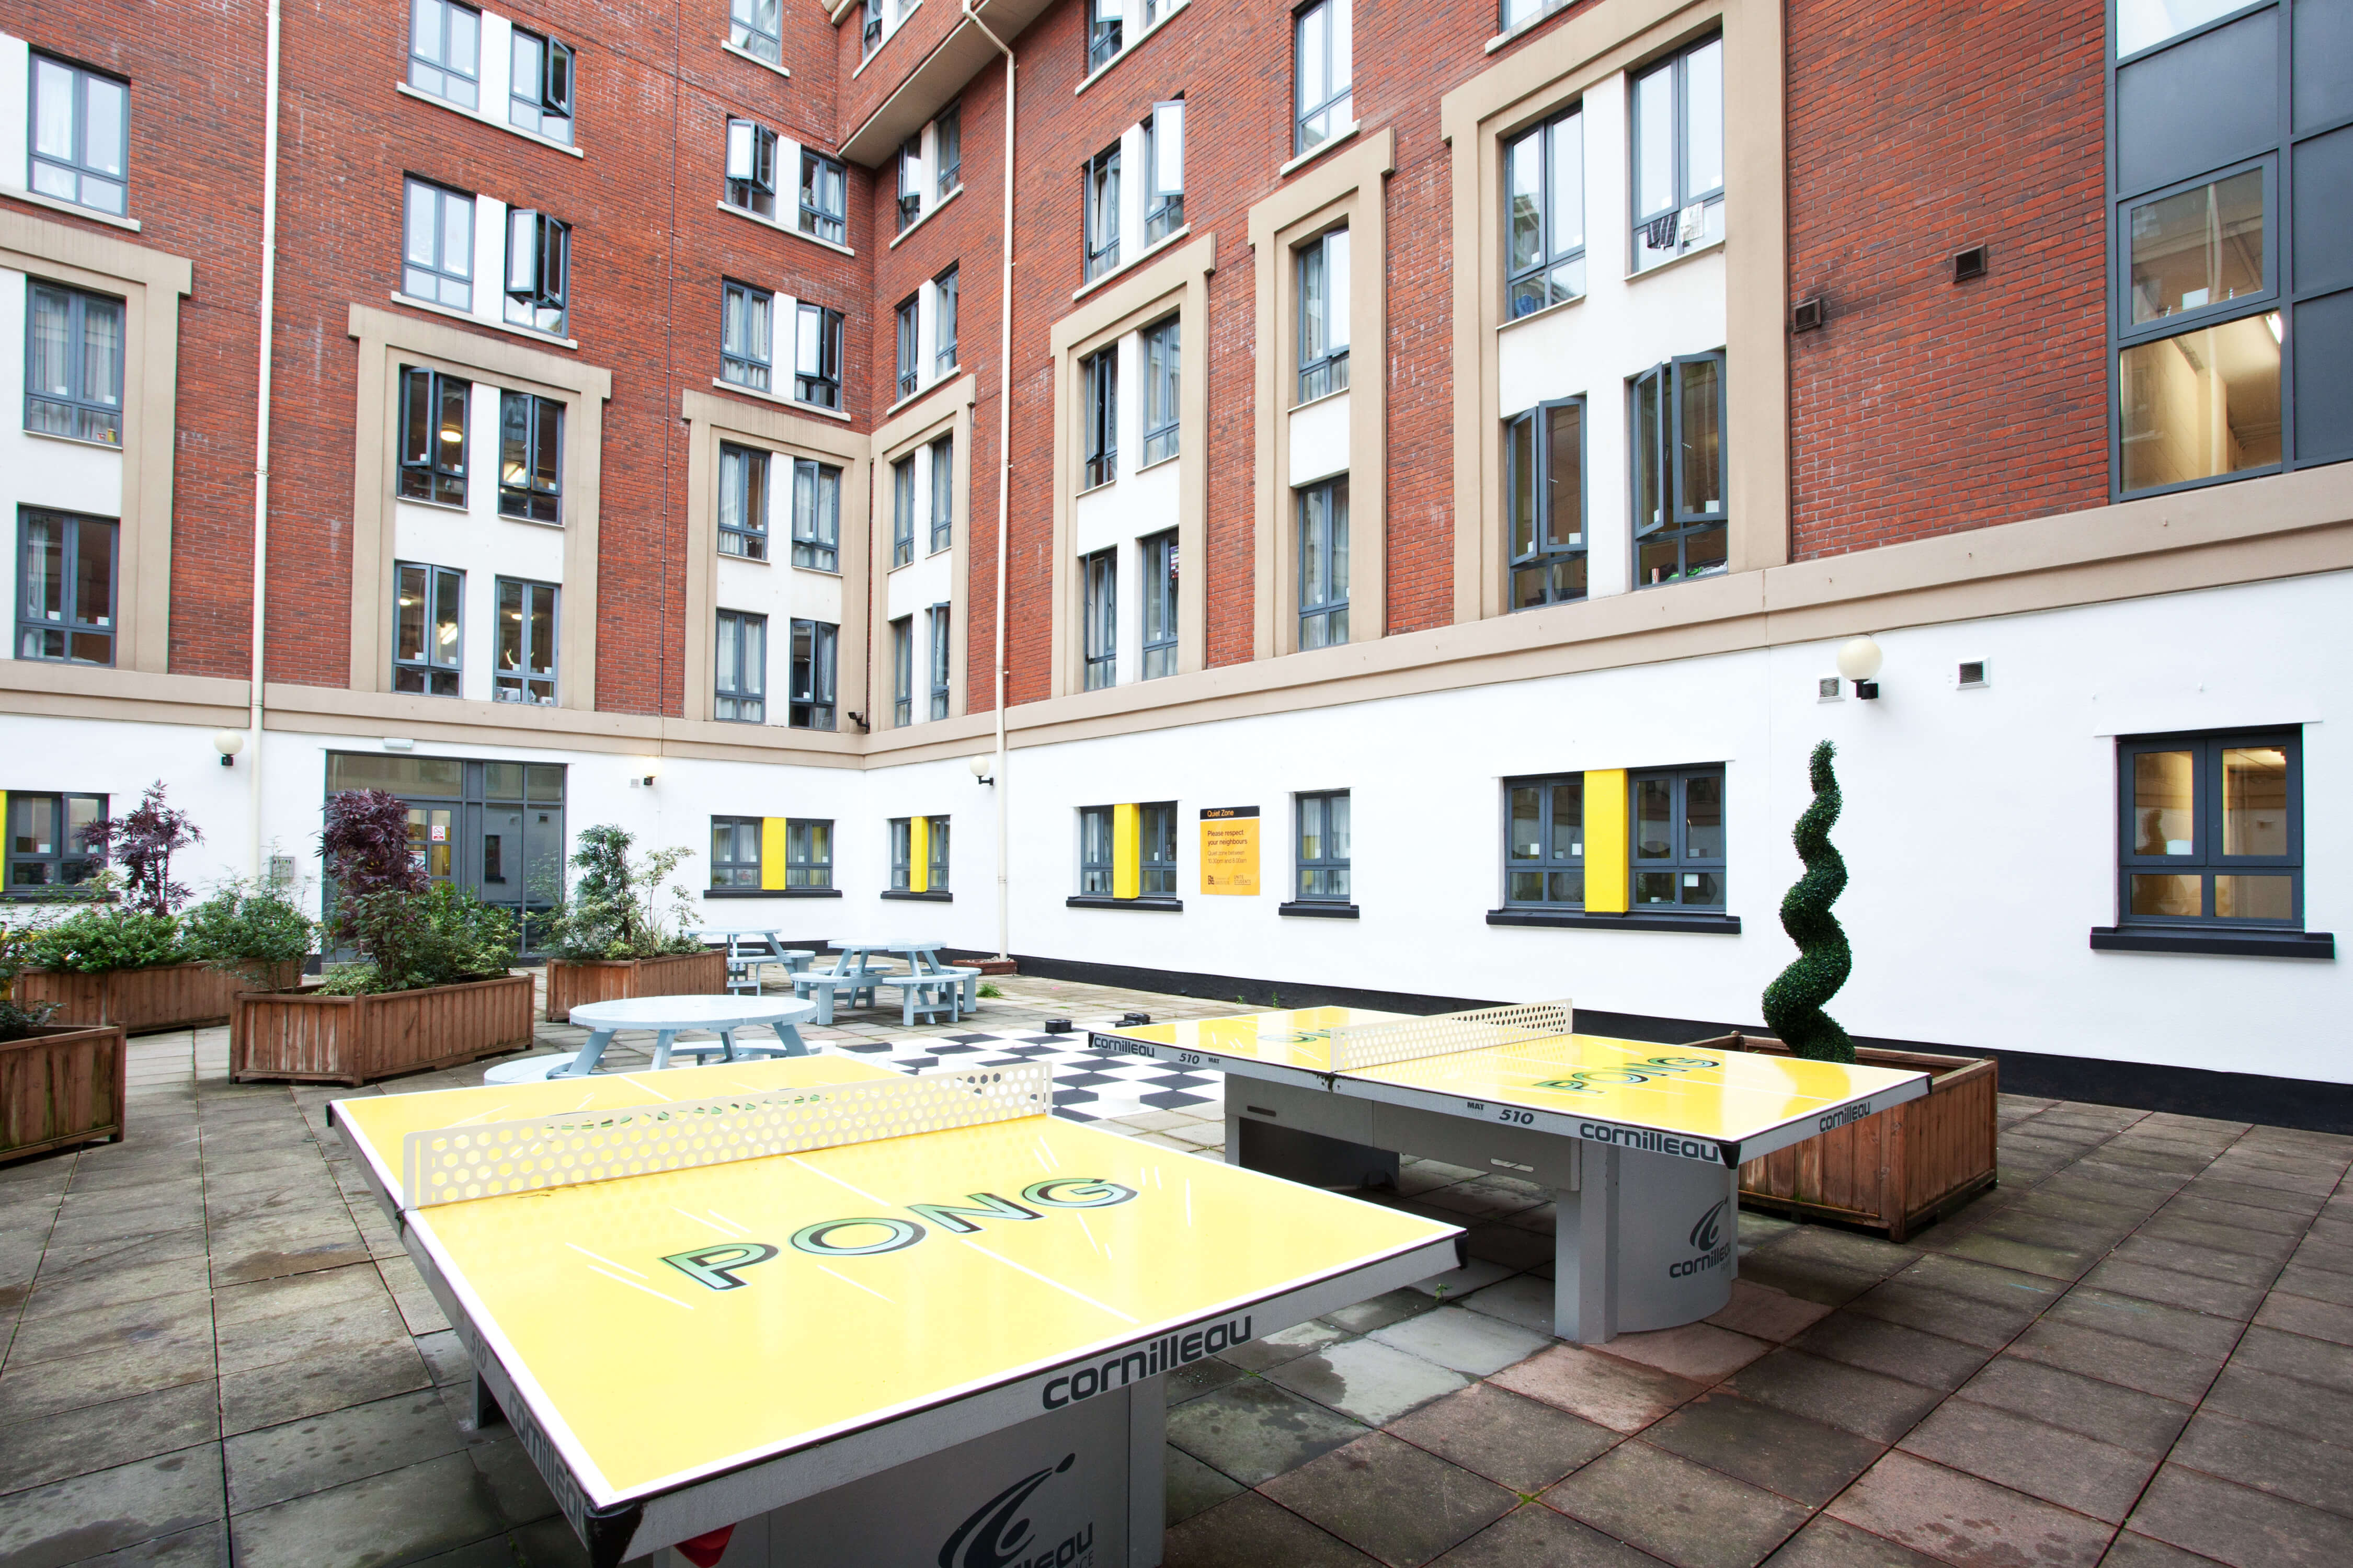 Ping pong tables in courtyard 